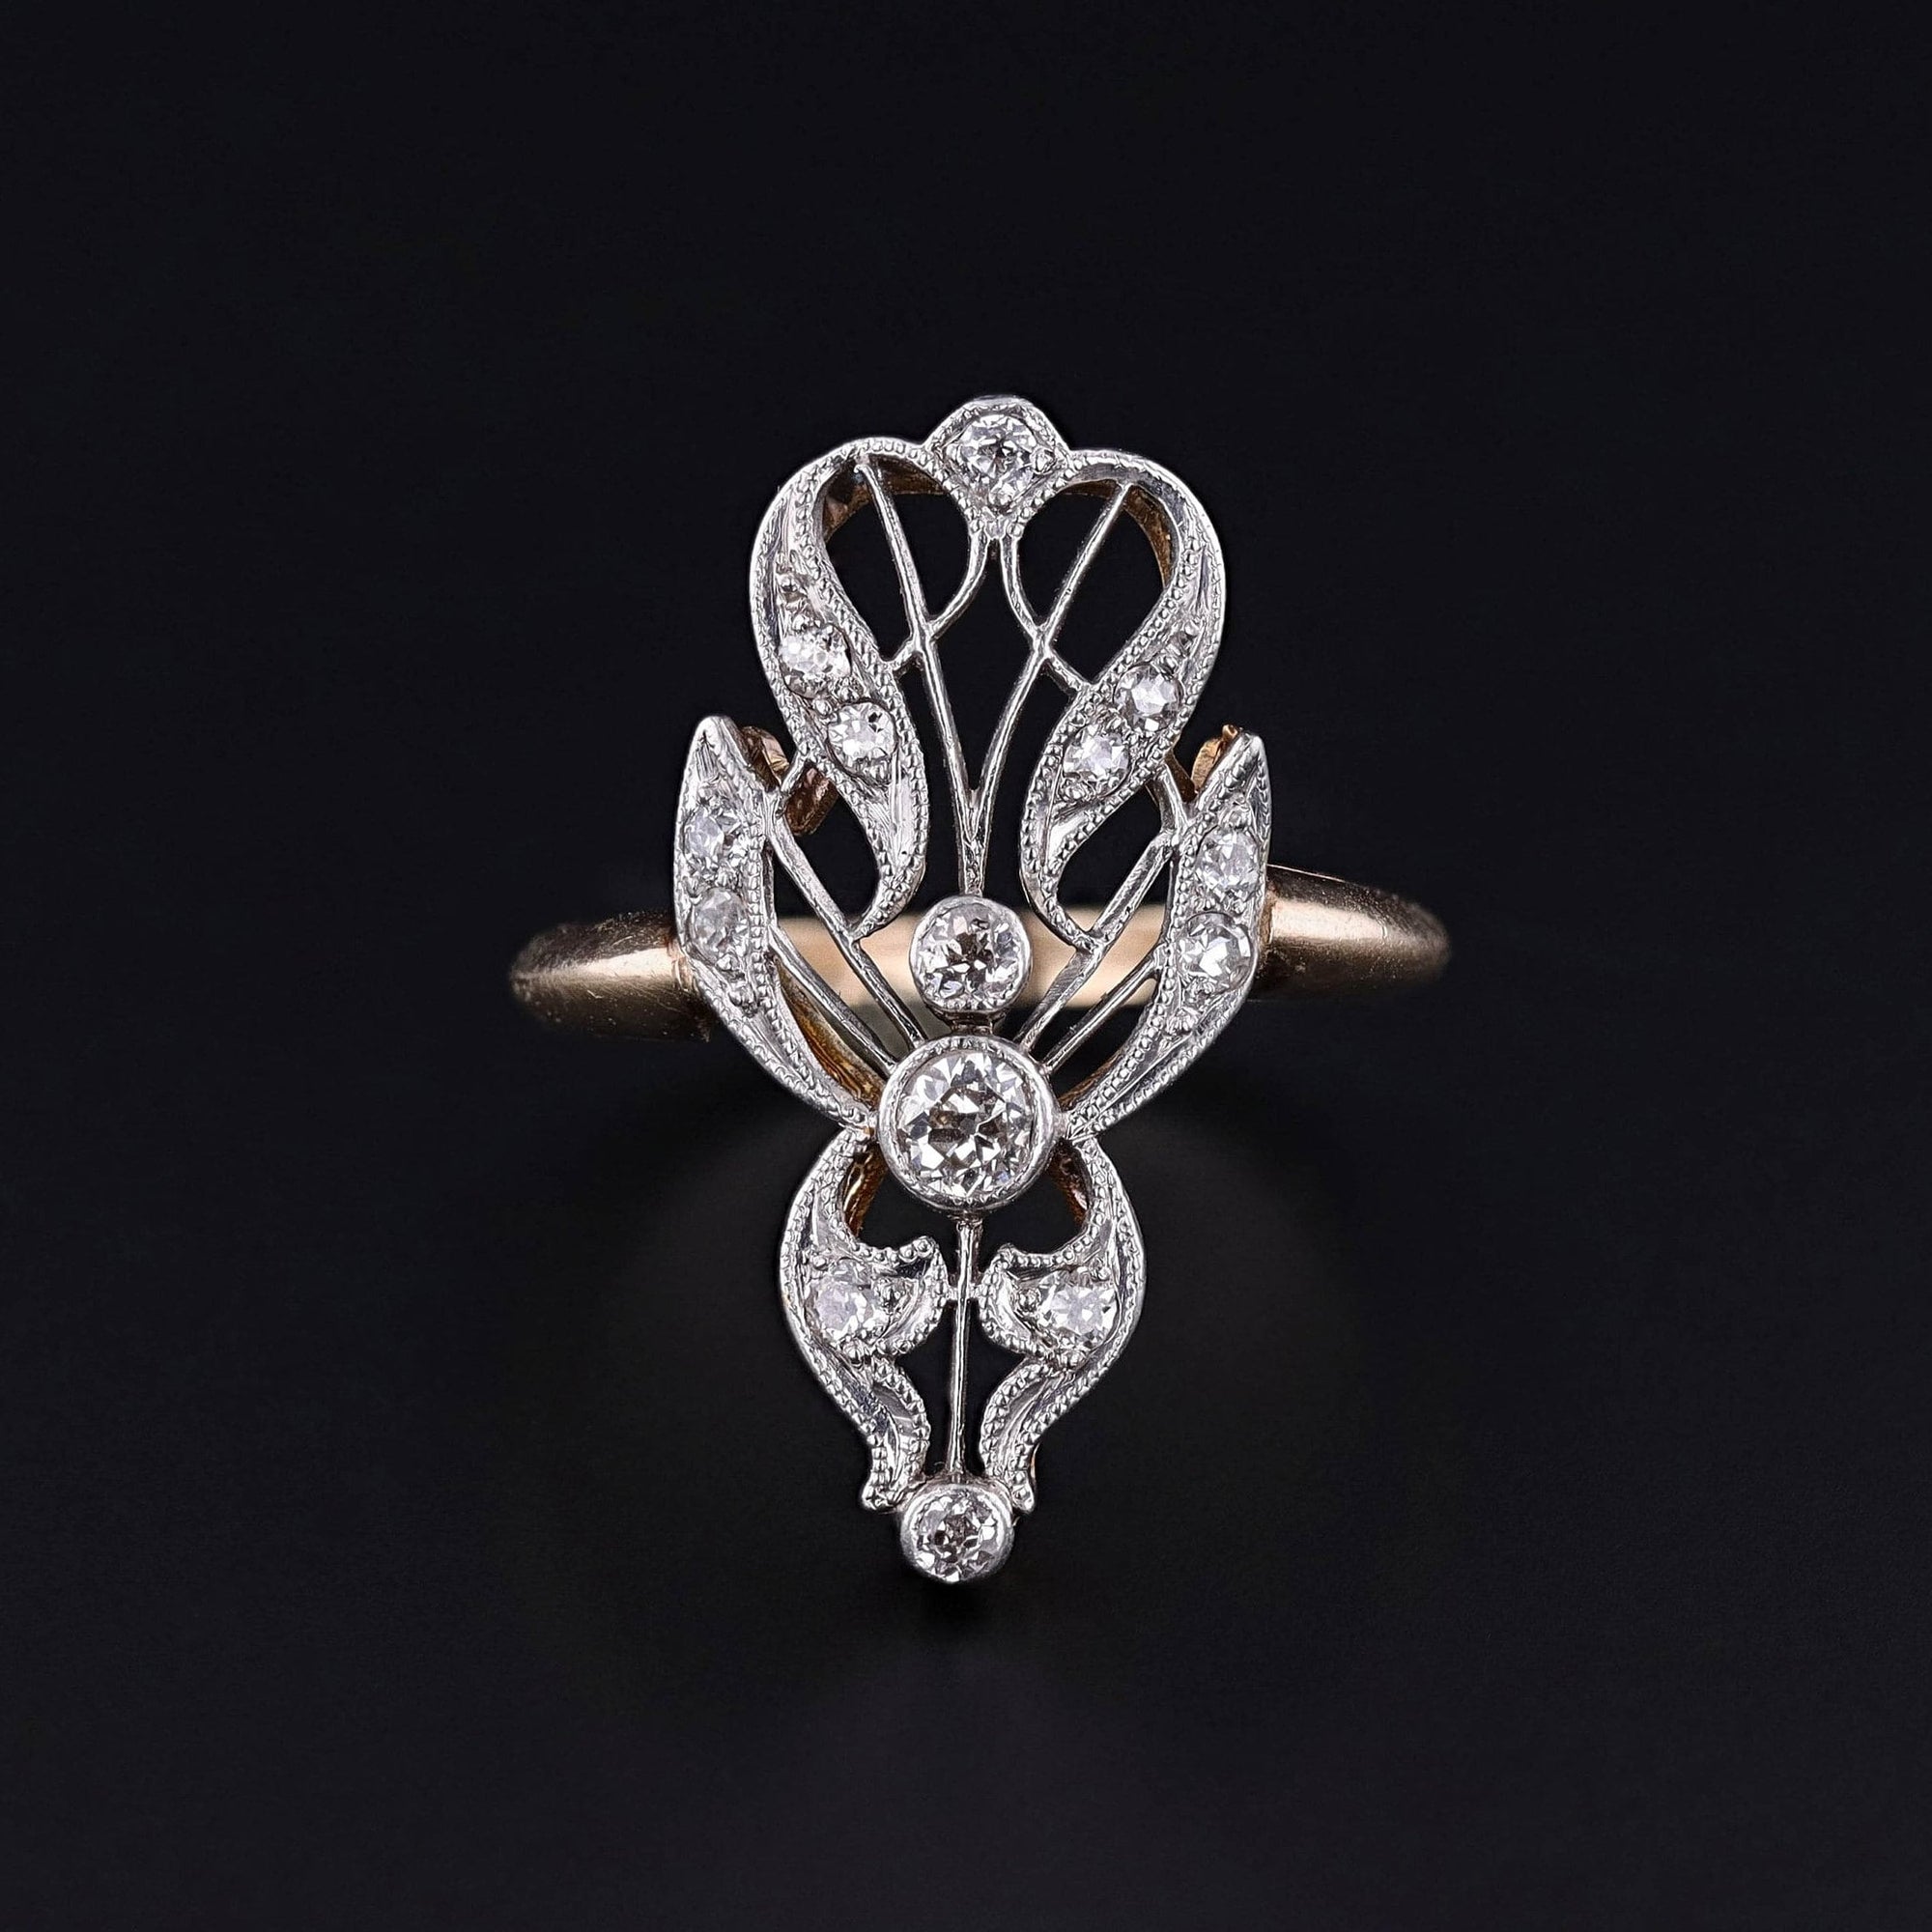 A belle epoque era platinum topped 14k gold diamond ring. The elongated ring is in excellent condition and currently a large size 9.25. It can be re-sized free of charge.